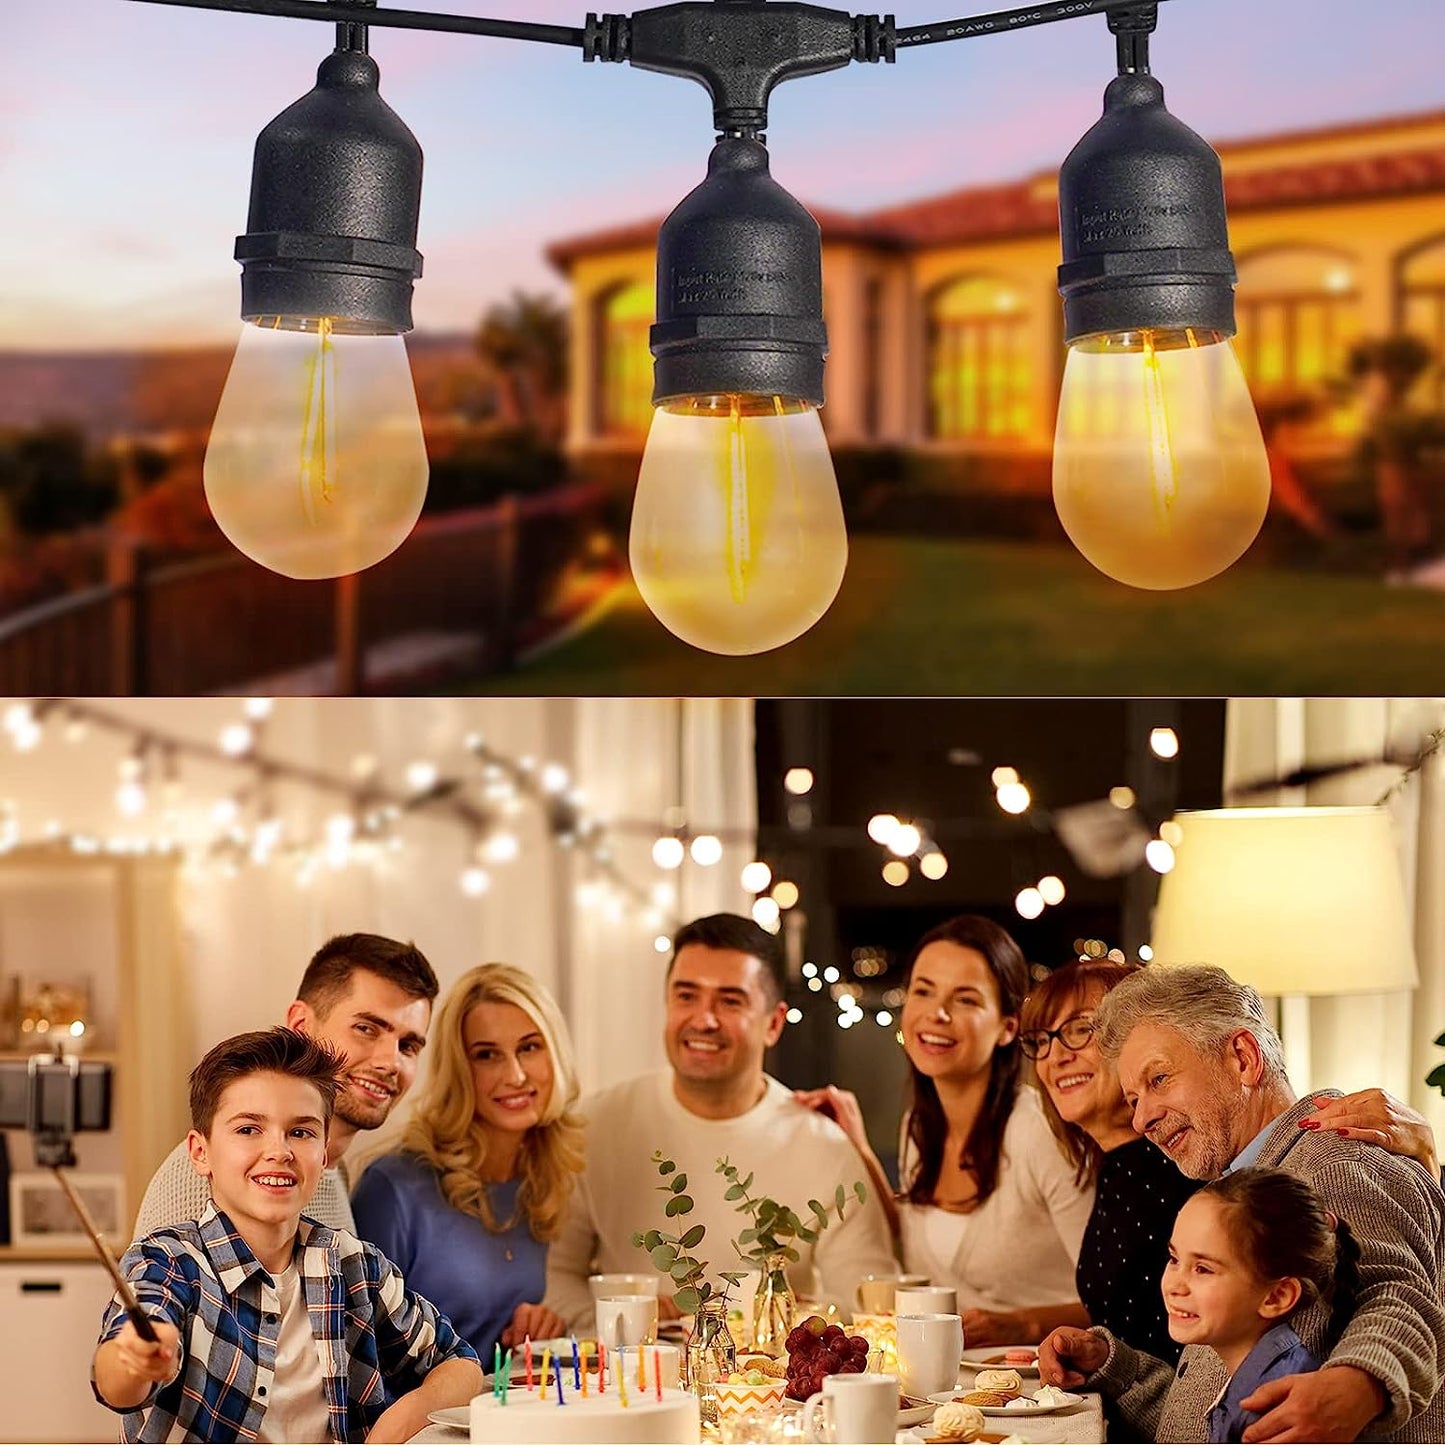 Solar String Lights with Remote Control, IPStank 50FT - Buy Solar String Lights with Remote Control, IPStank 50FT in Dubai - HOCC Dubai - Baby playground outdoor - Shop baby product - Shop Pet product - shop home decor and lighting in Dubai - HOCC Dubai -